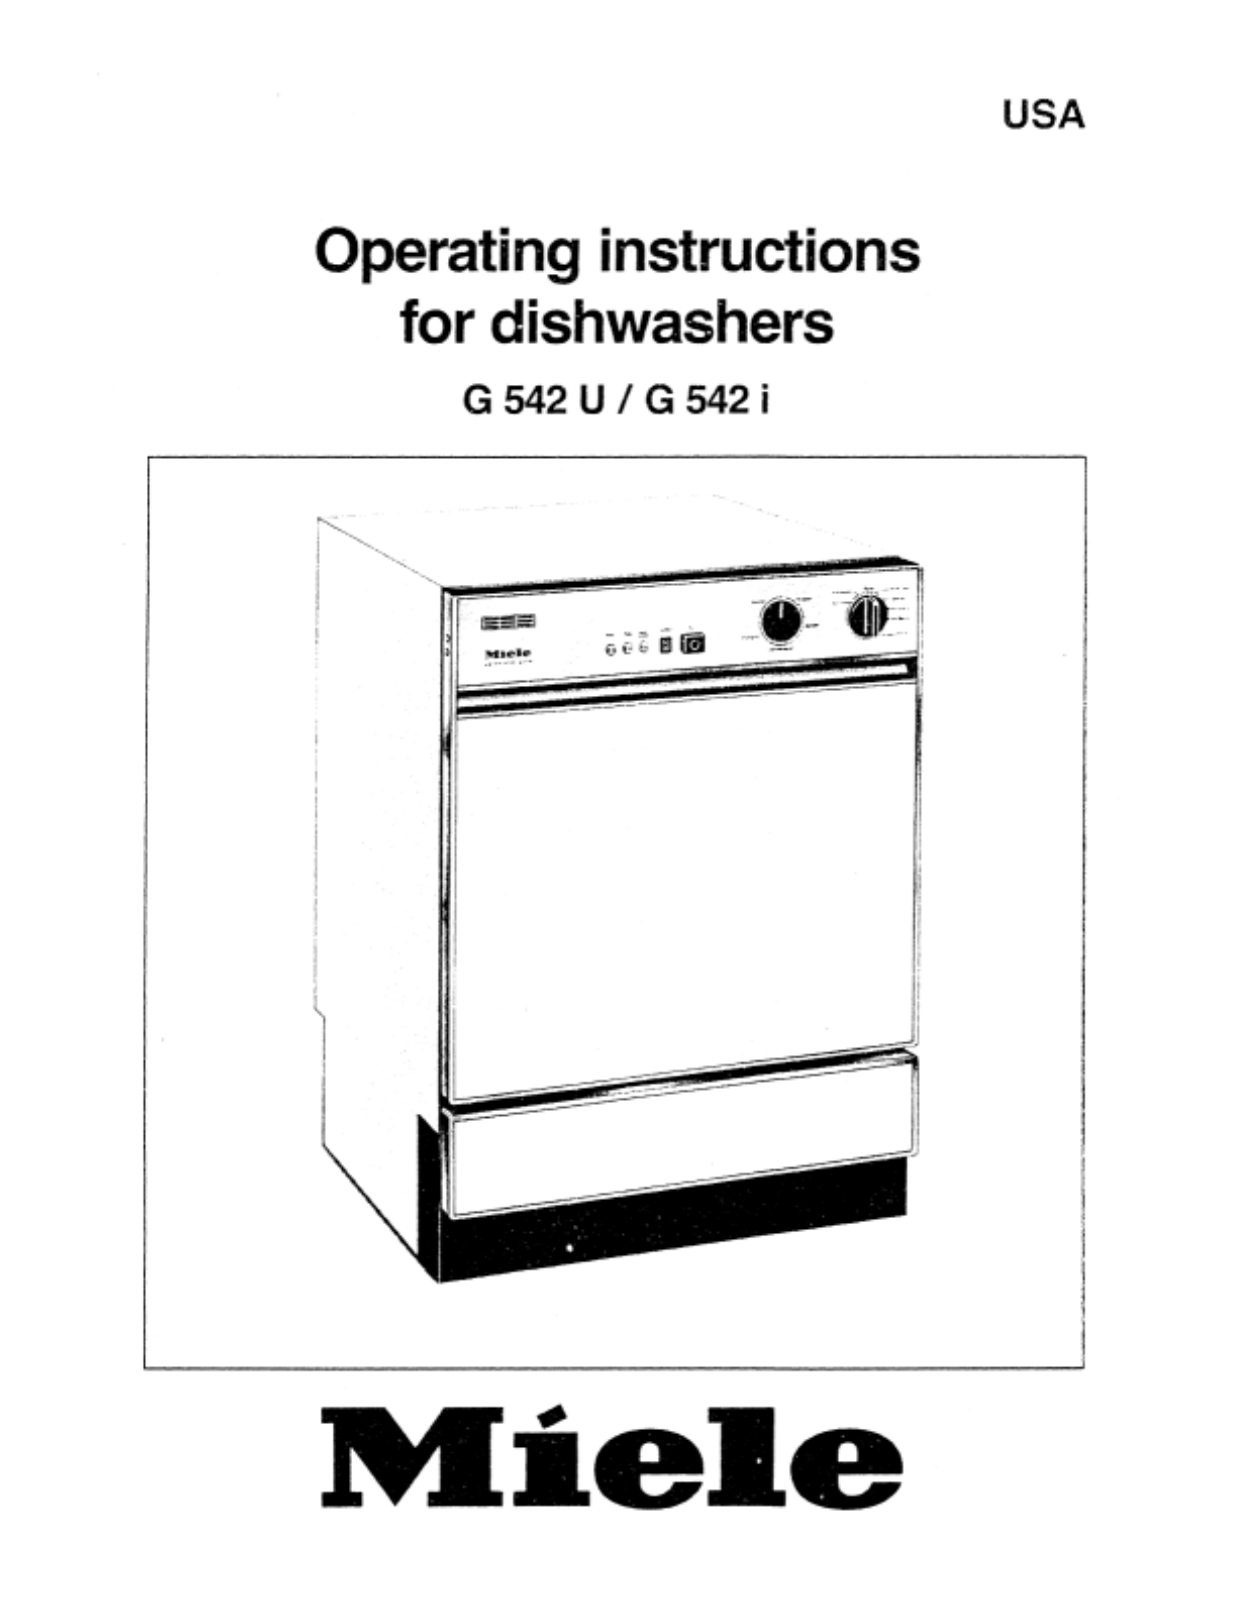 Miele G 542 Operating instructions